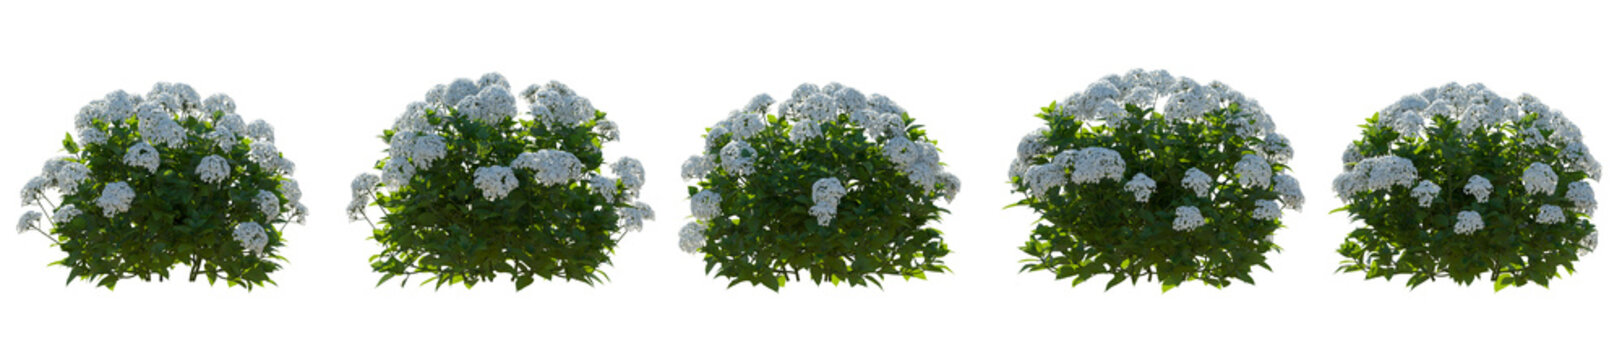 Set of hydrangea arborescens annabelle bush shrub isolated png on a transparent background back lighting perfectly cutout
